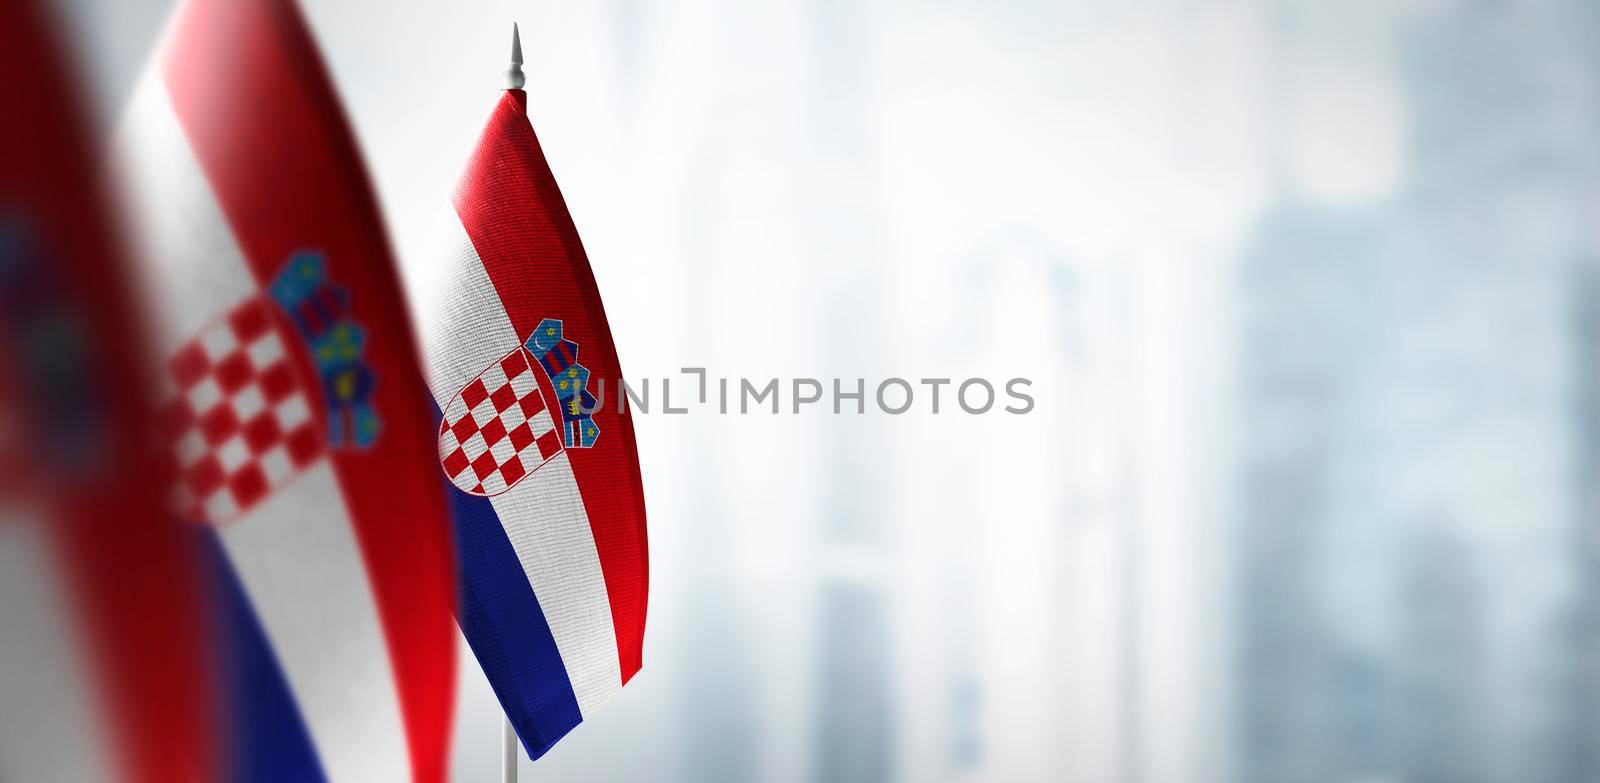 Small flags of Croatia on a blurry background of the city.